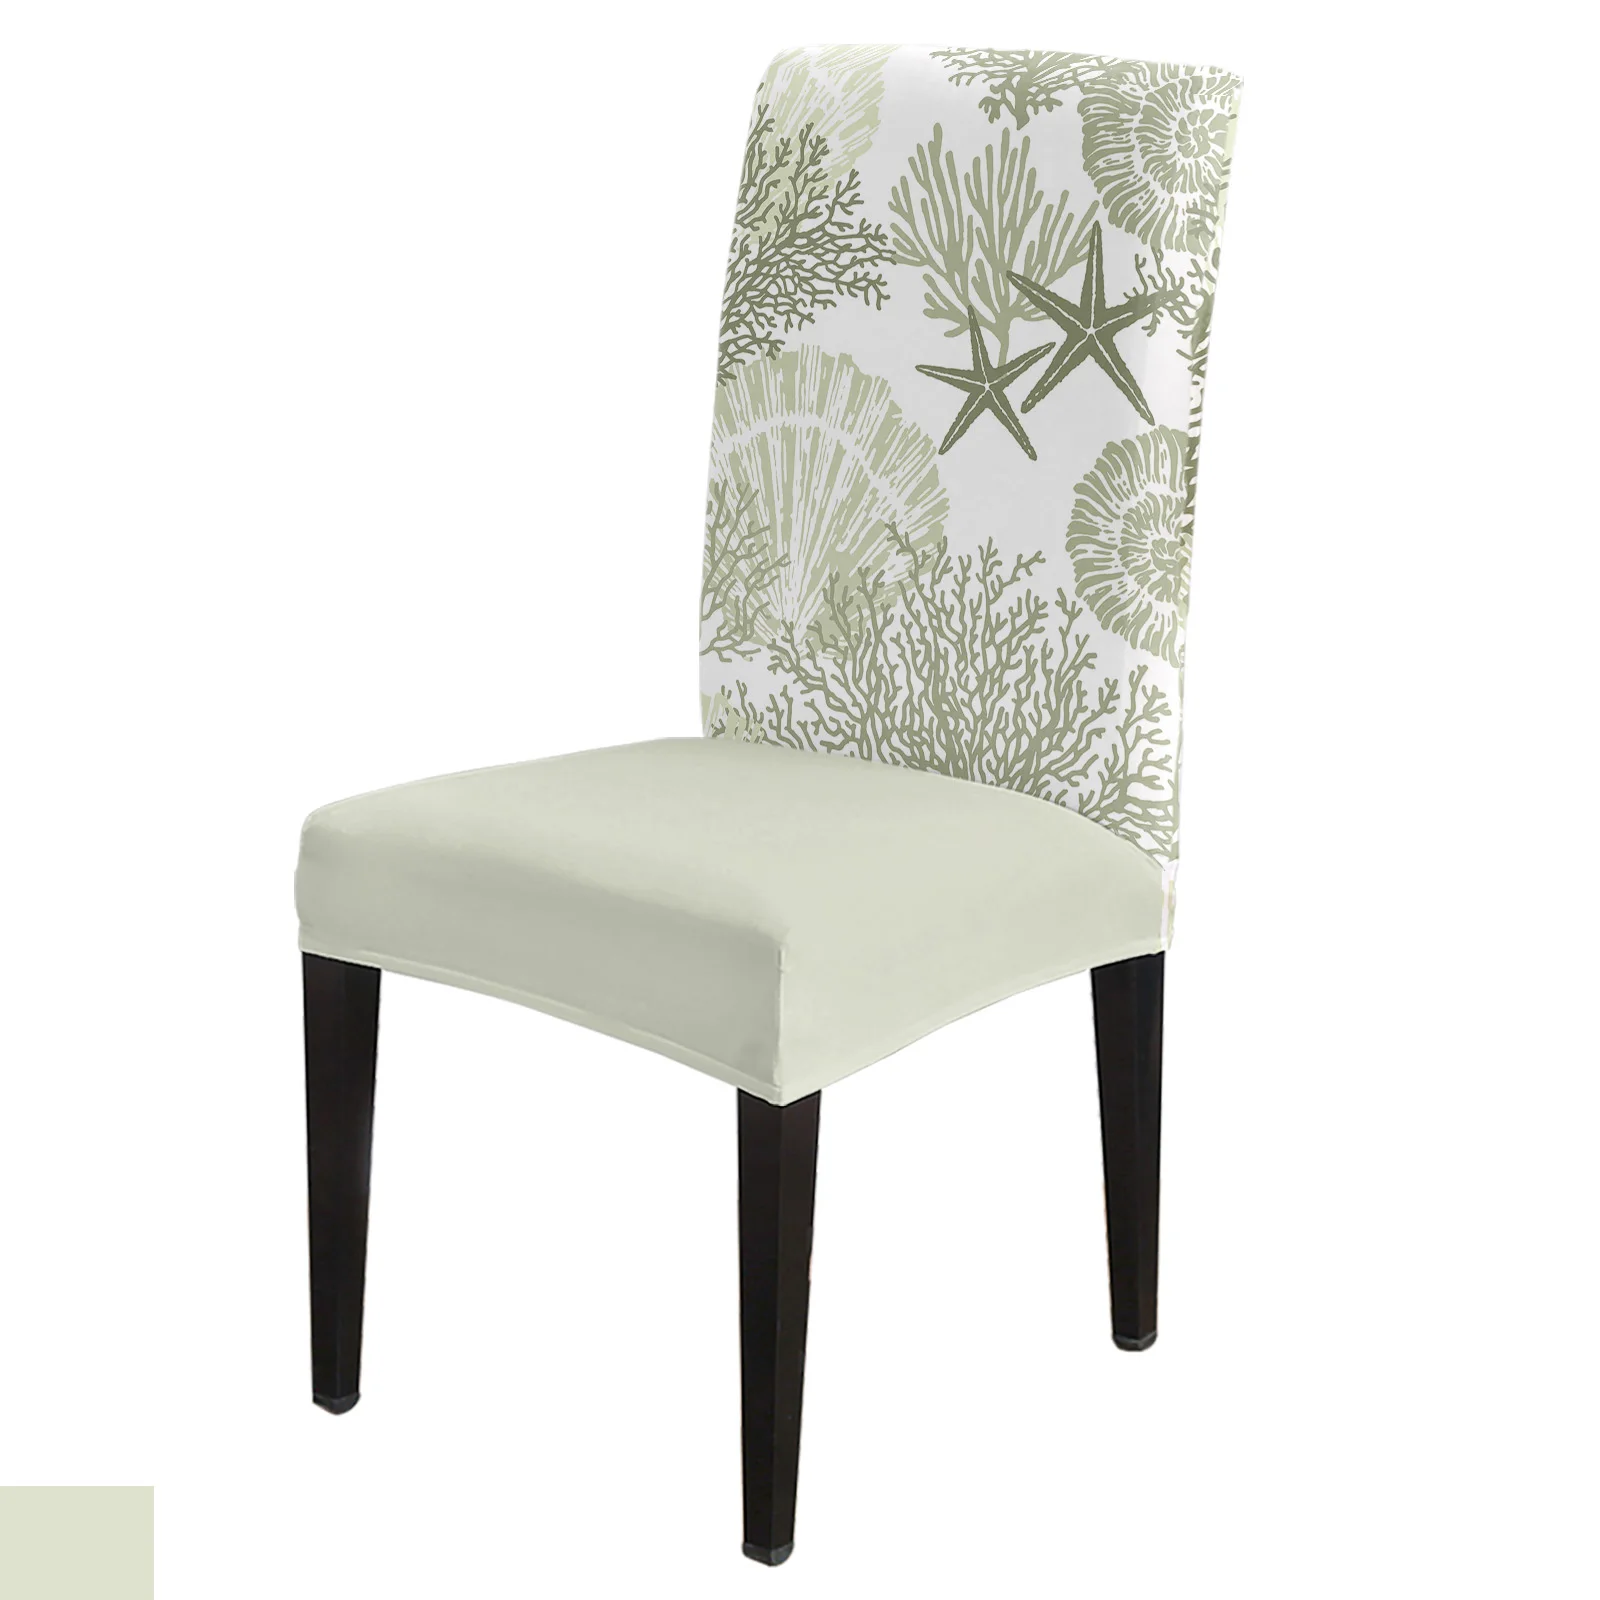 

Sage Green Ocean Coral Shells Starfish Chair Cover Set Kitchen Stretch Spandex Seat Slipcover Home Decor Dining Room Seat Cover